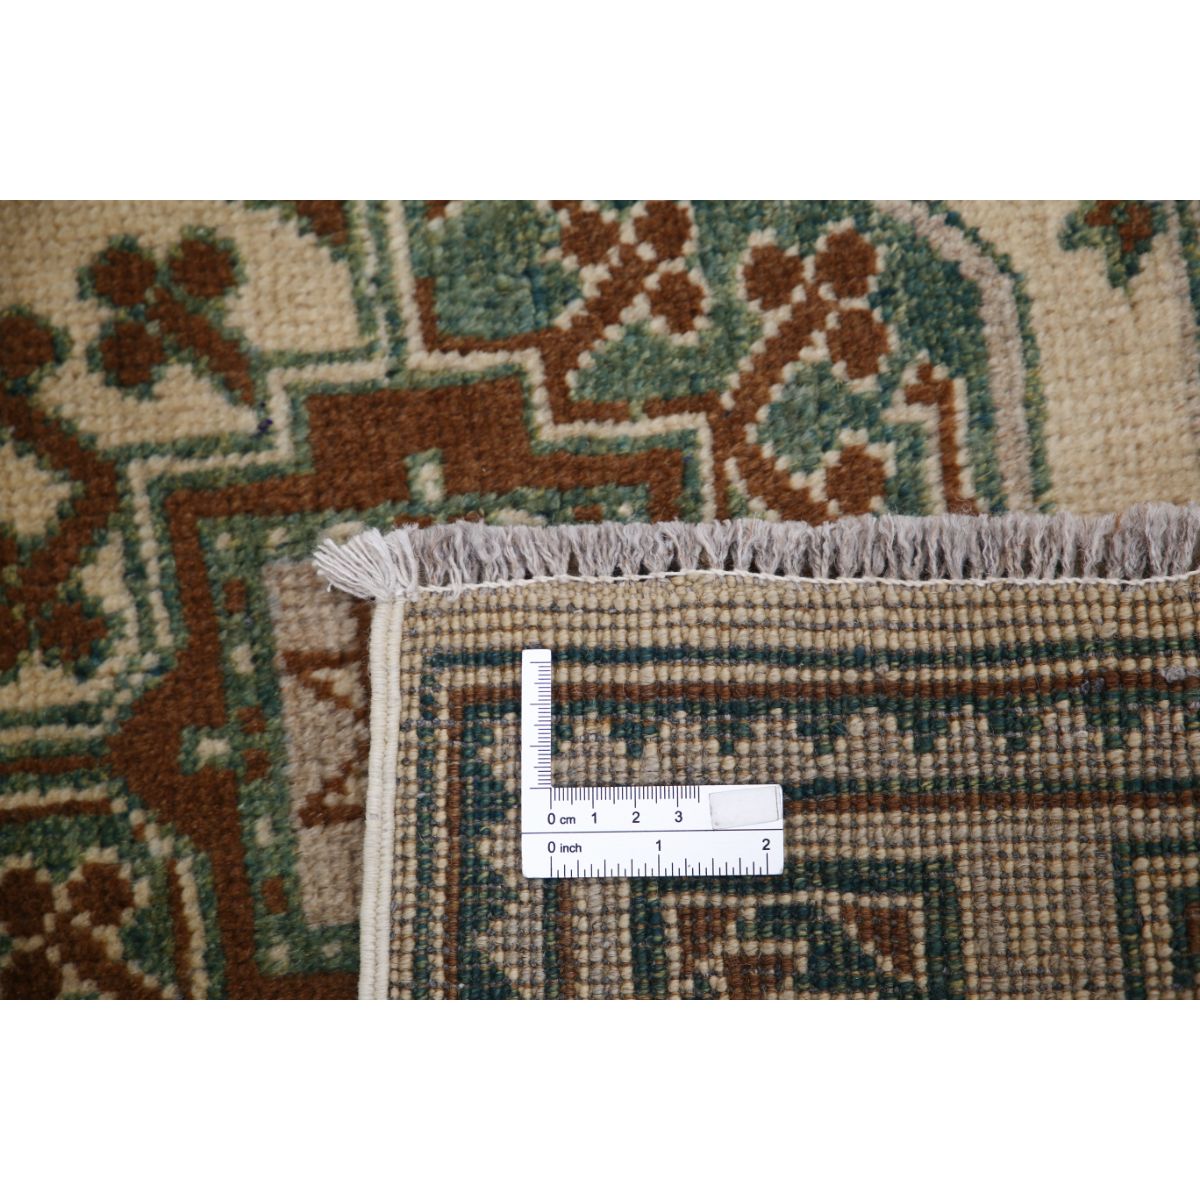 Revival 4' 0" X 6' 1" Wool Hand Knotted Rug